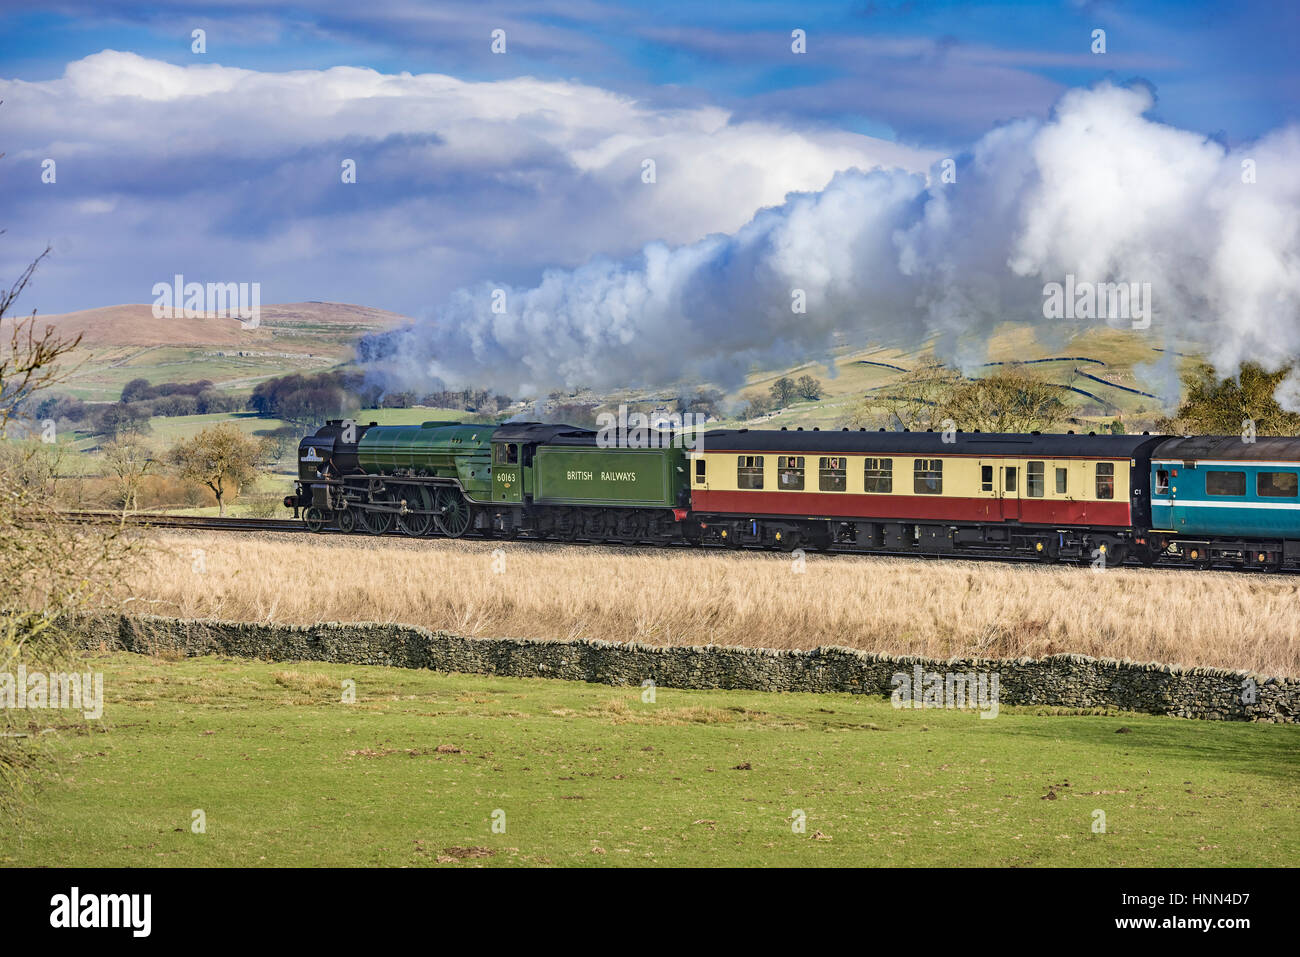 Helwith Bridge. North Yorkshire. North West England. Wednesday 15th February 2017. The Peppercorn steam engine Tornado on the secnond day of hauling scheduled trains between Skipton and Appleby on the Settle to Carlisle railway. The services are the first schedueld steam hauled services on British rail for 50 years. Picture by Martin Birchall. Stock Photo